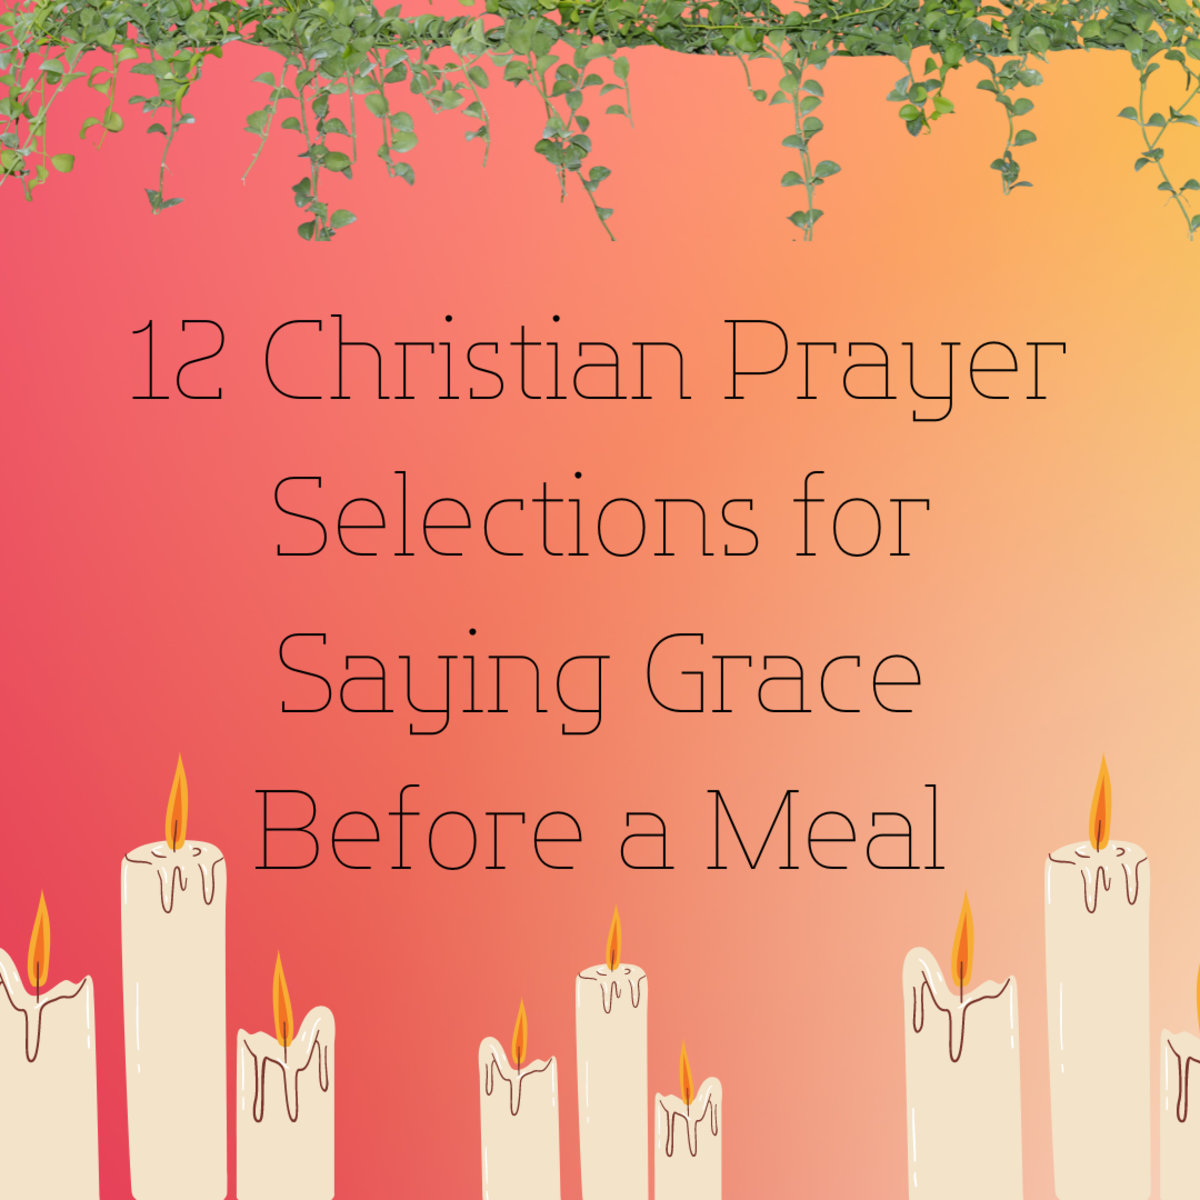 Here are twelve Christian prayer selections for those who are saying Grace before a meal. 